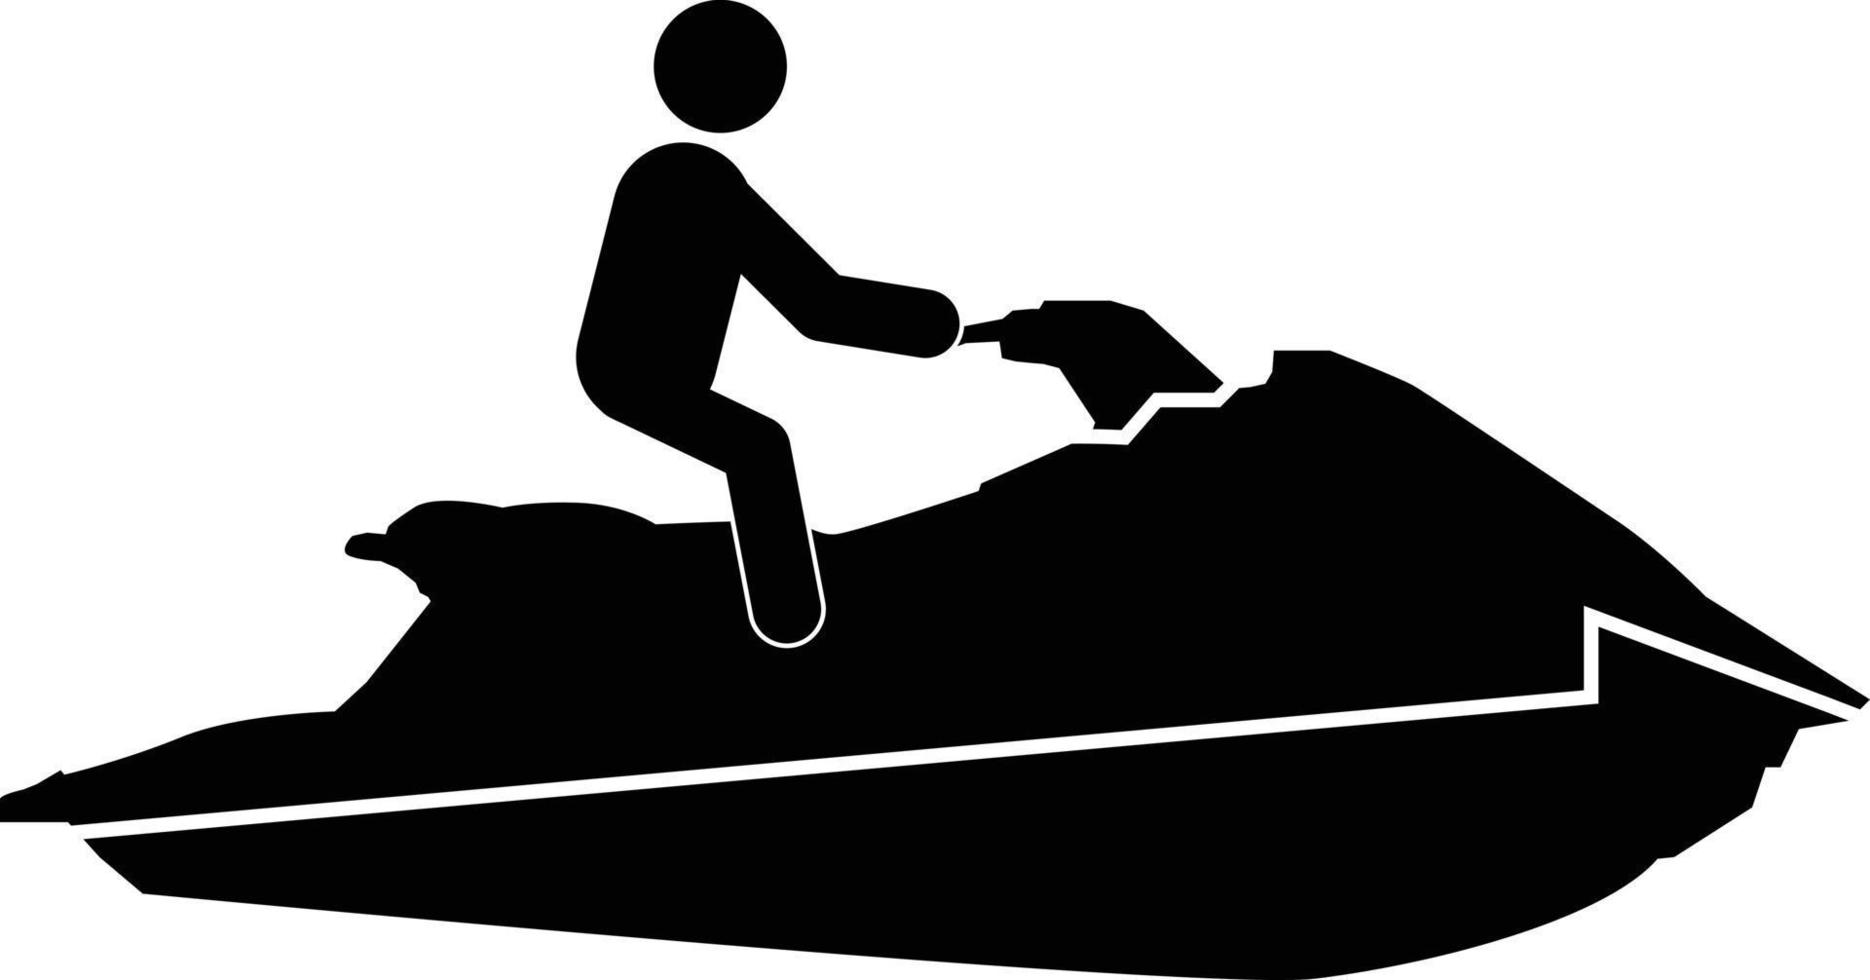 Jet ski icon on white background. Scooter transport water sport sign. A rider on a water scooter symbol. flat style. vector